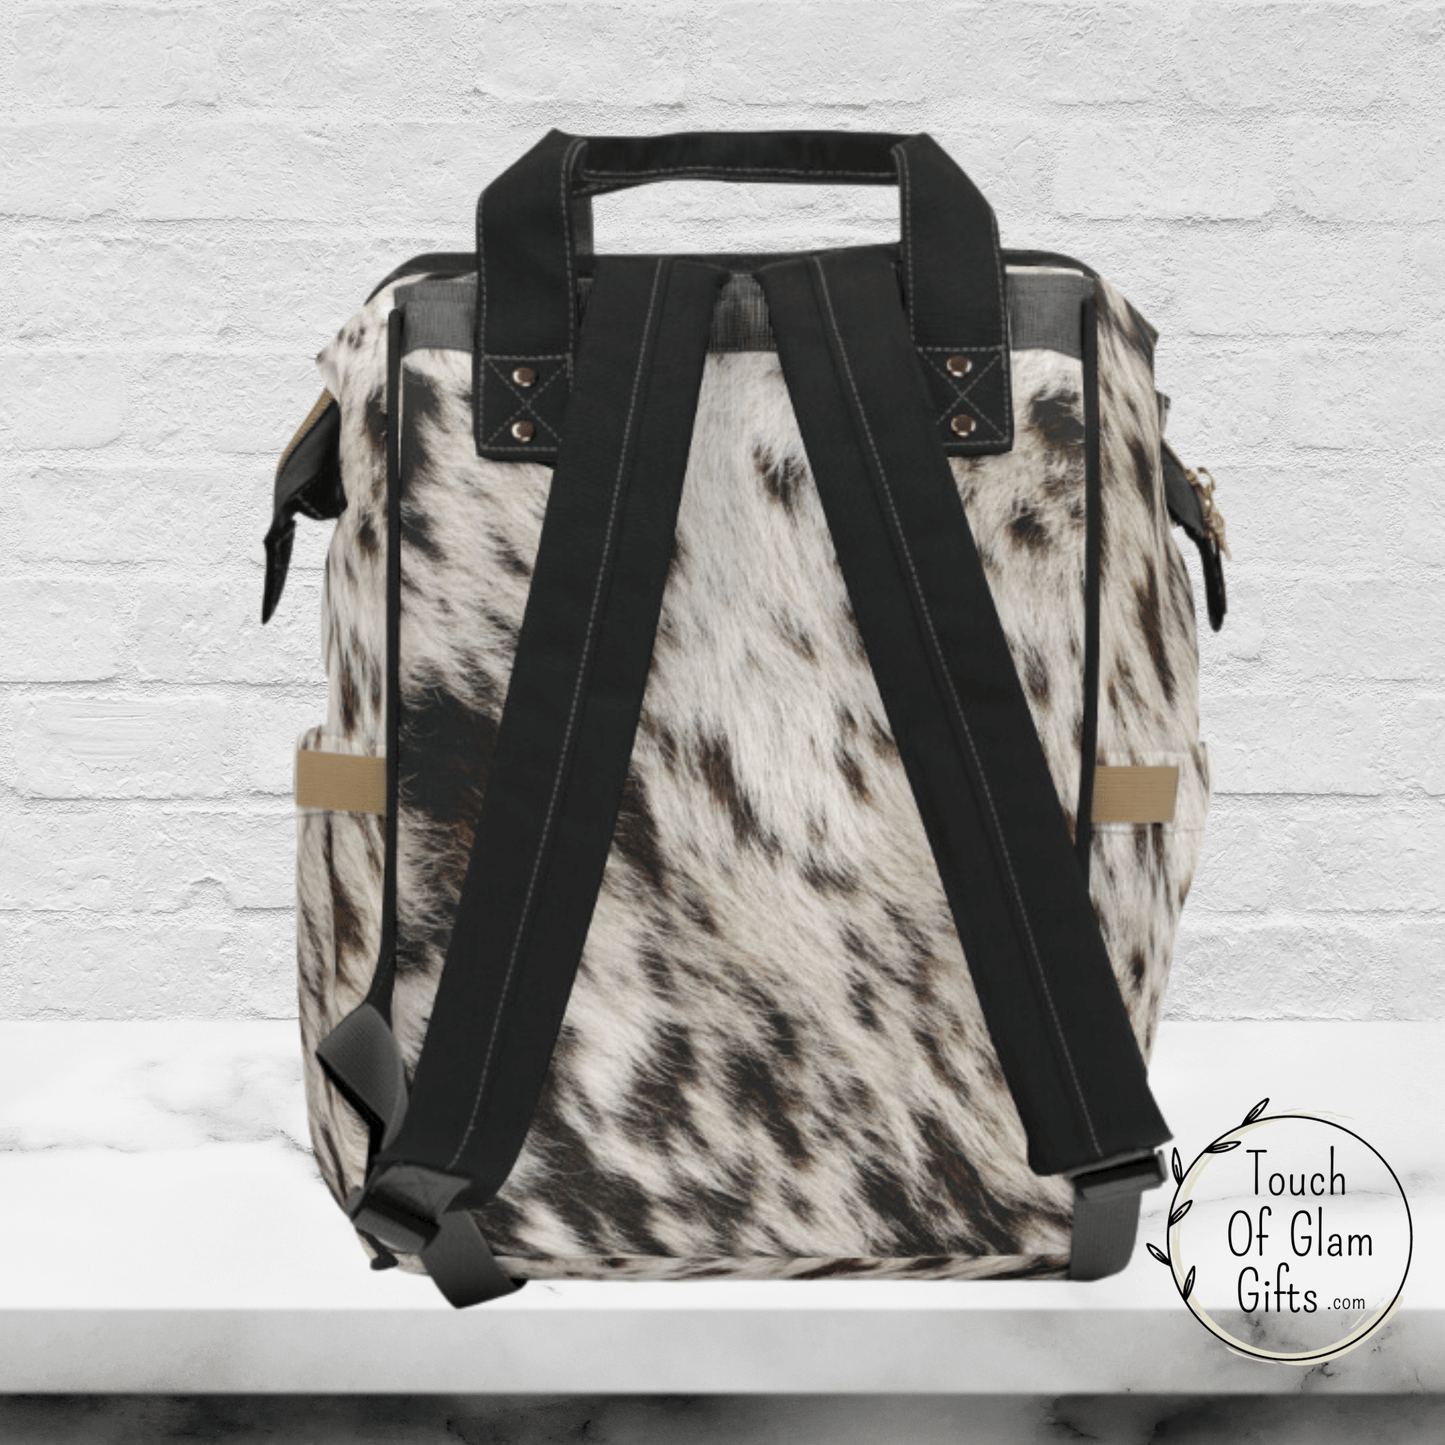 The back side of our cow print backpack shows black padded shoulder straps and a black carrying handle.